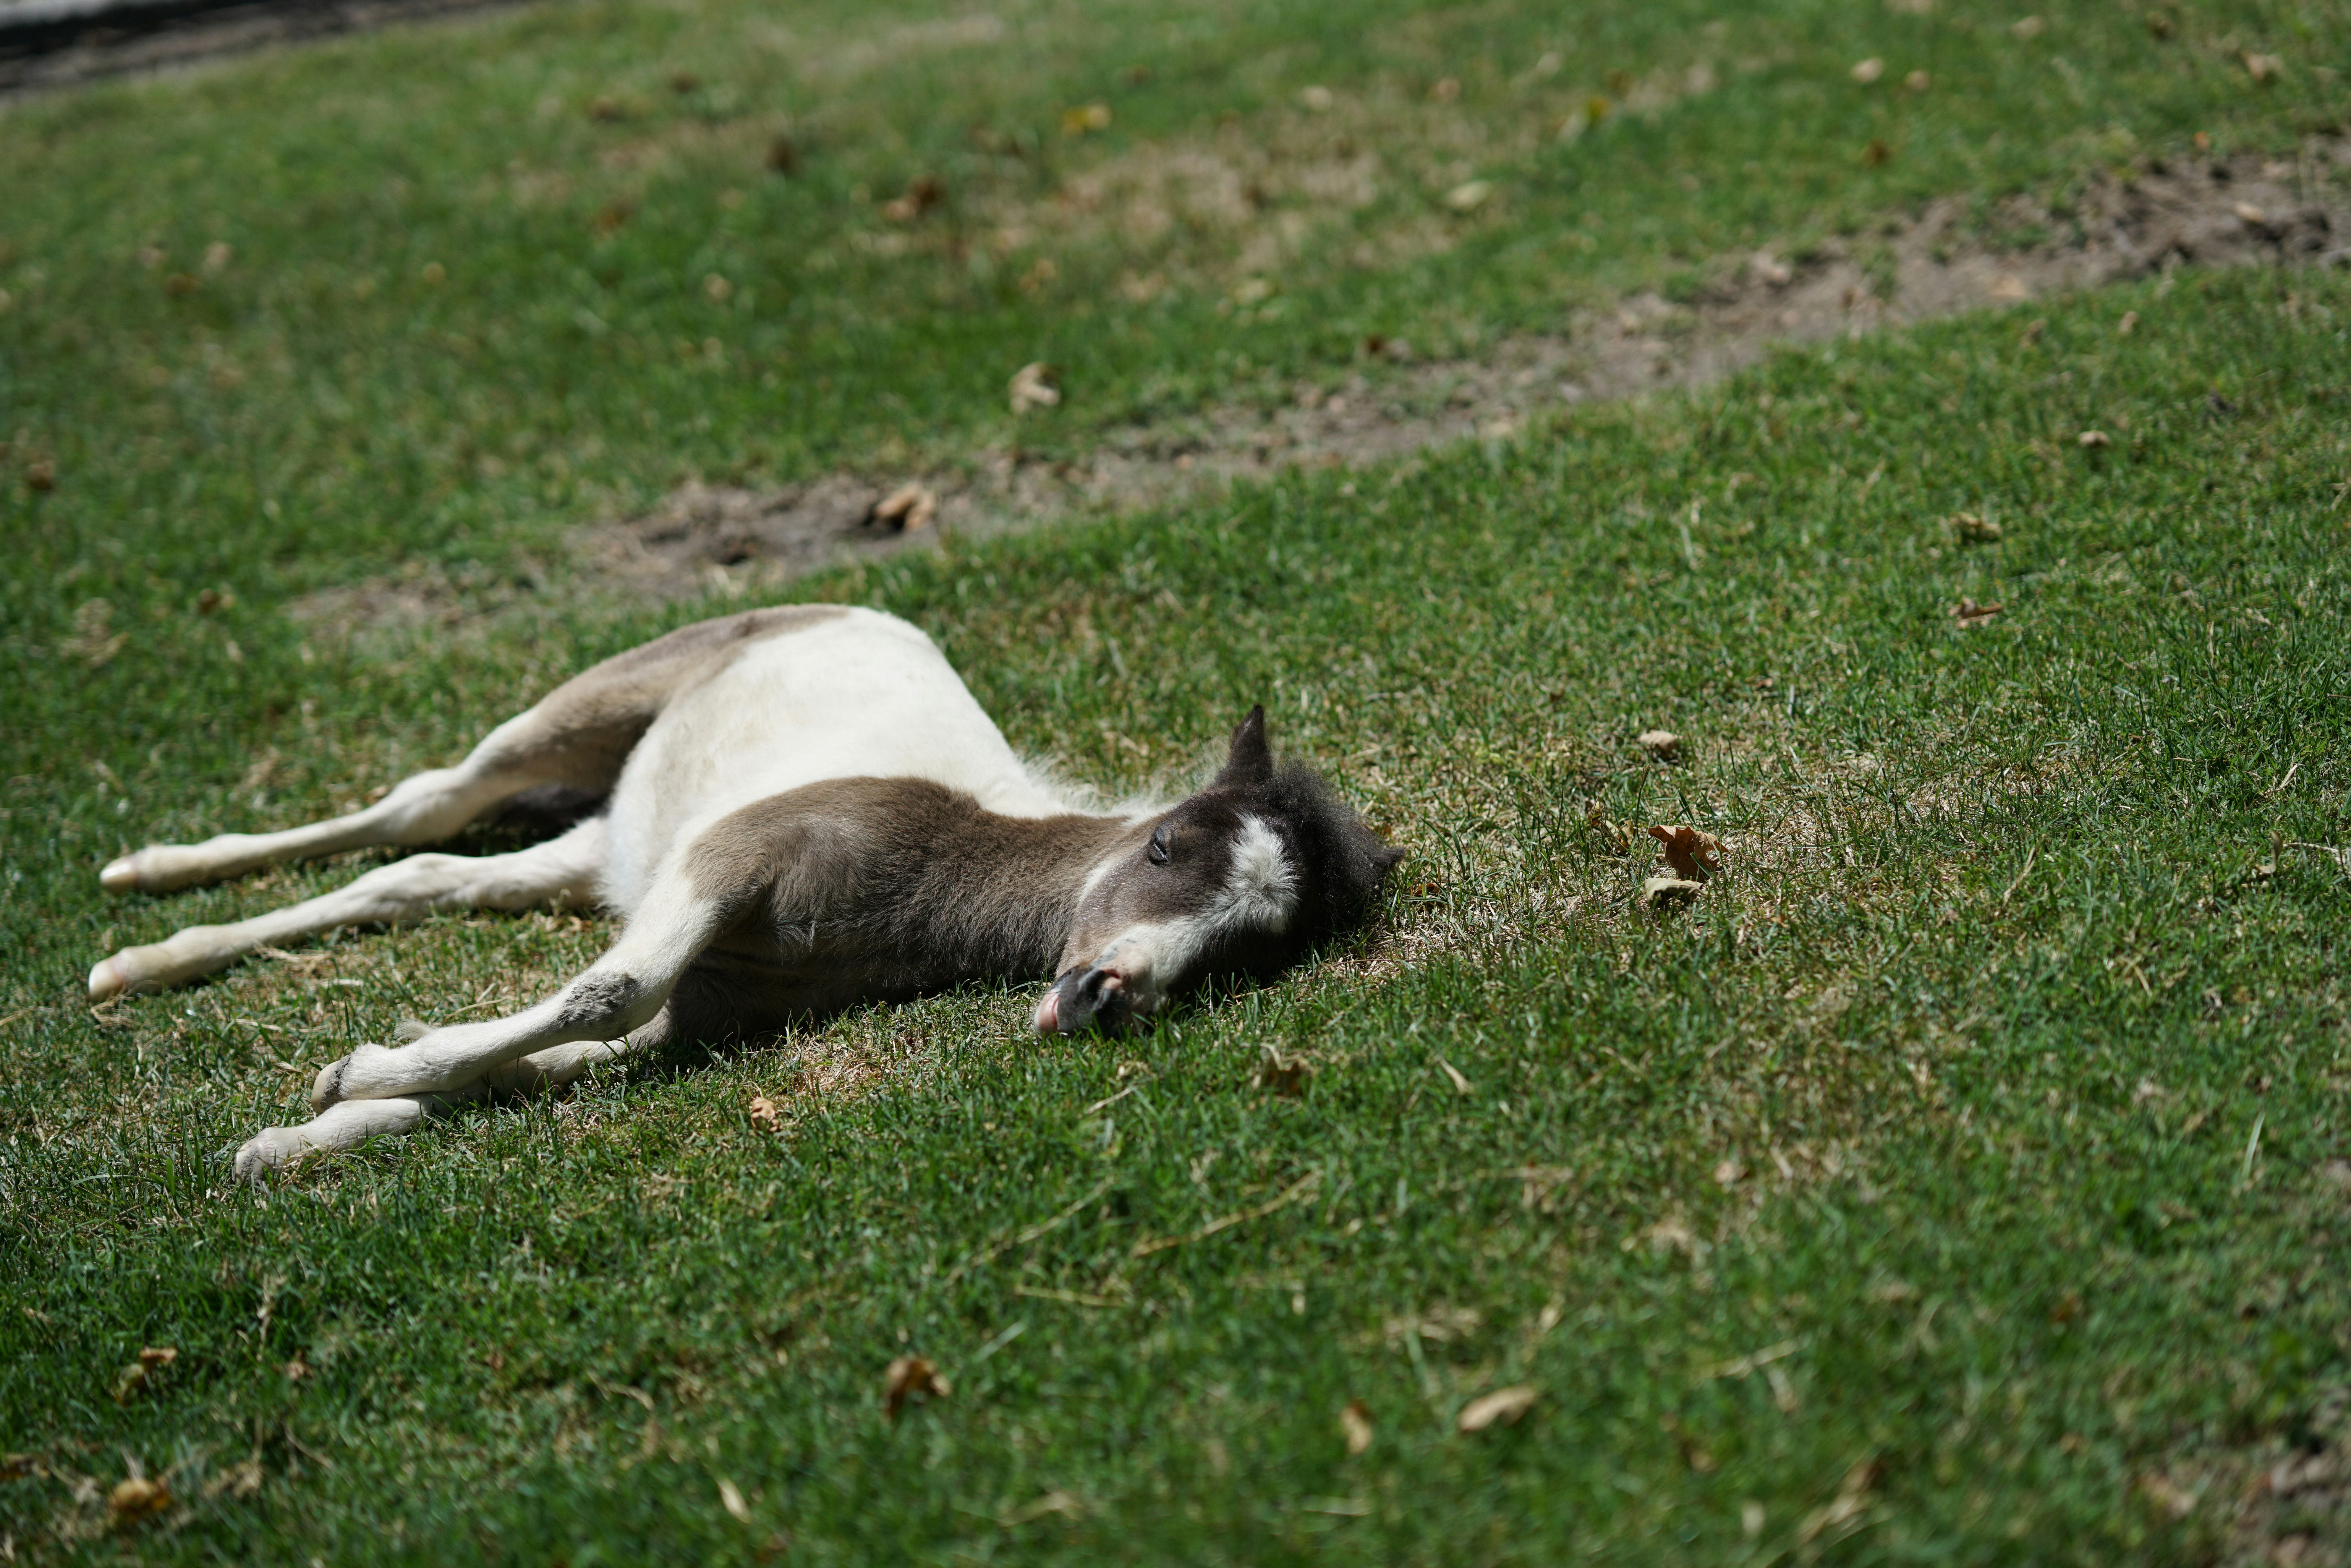 sleeping horse on green grass at daytime